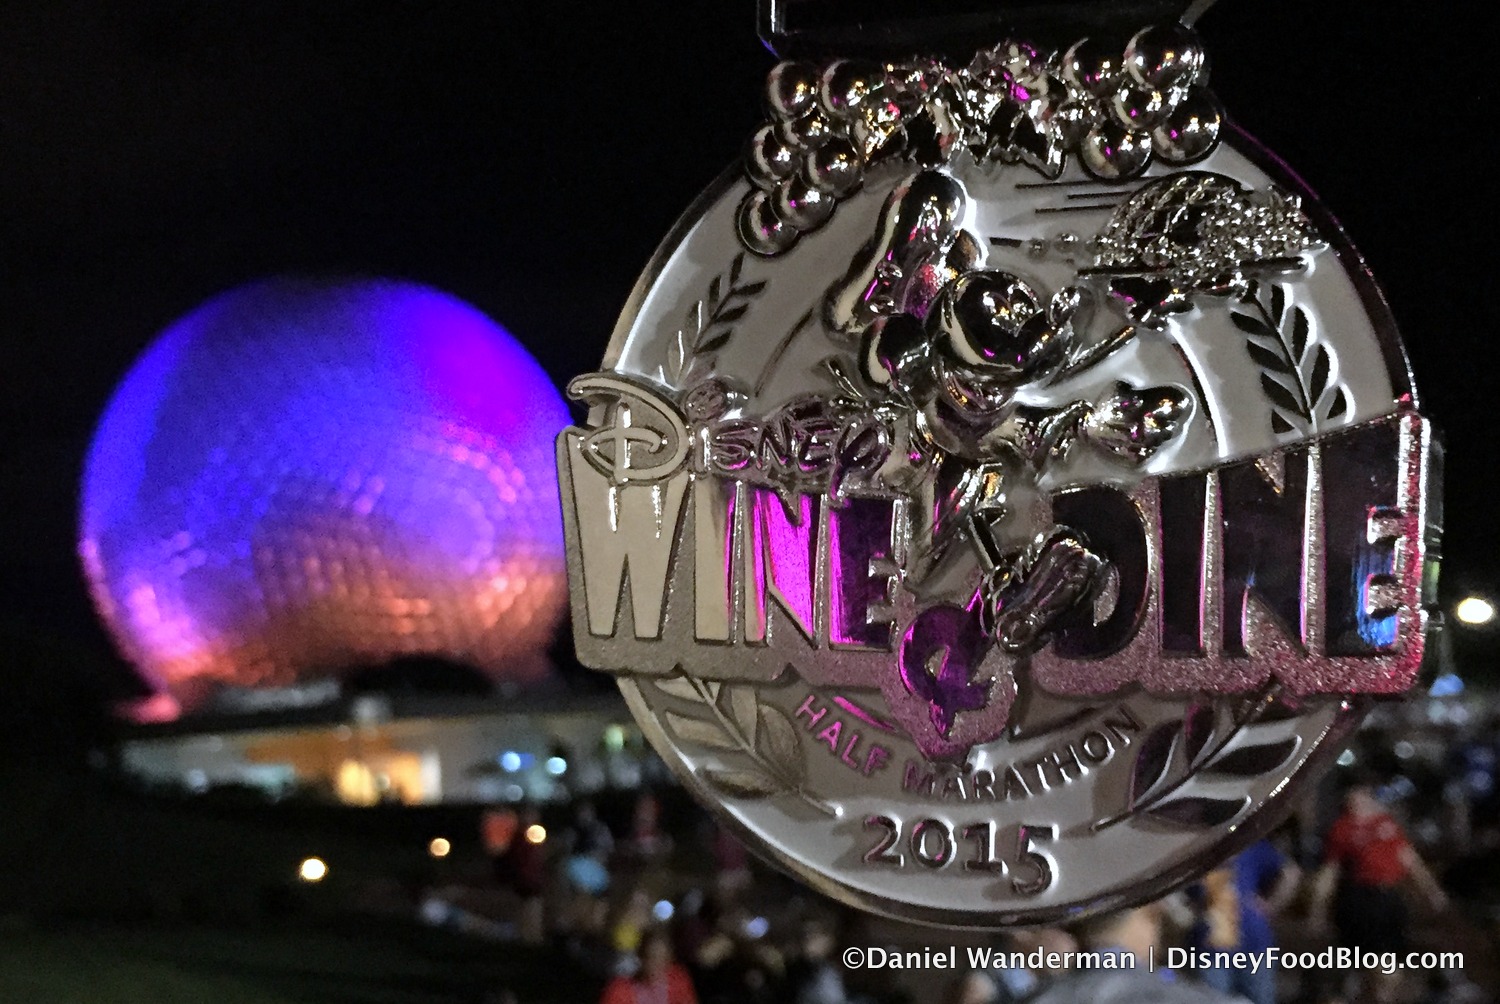 Epcot Food and Wine Festival Tips: When Should I Visit the Festival